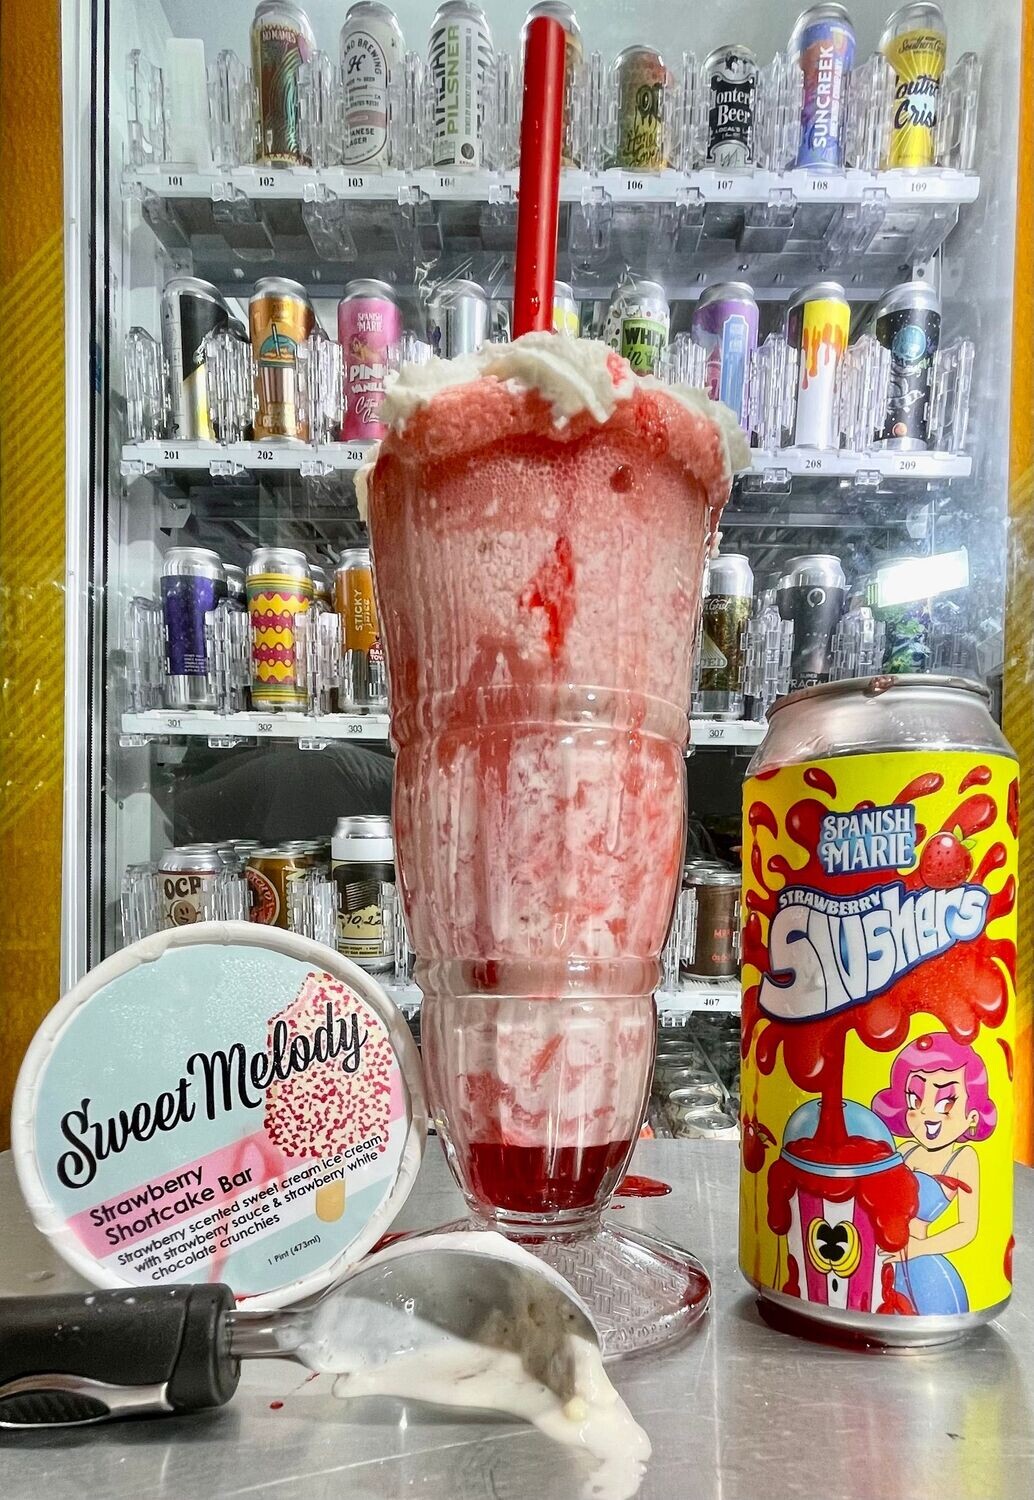 Crafty Beer Floats: Strawberry Shortcake Bar Slushers Beer Float with NO GLASS (16OZ CAN)